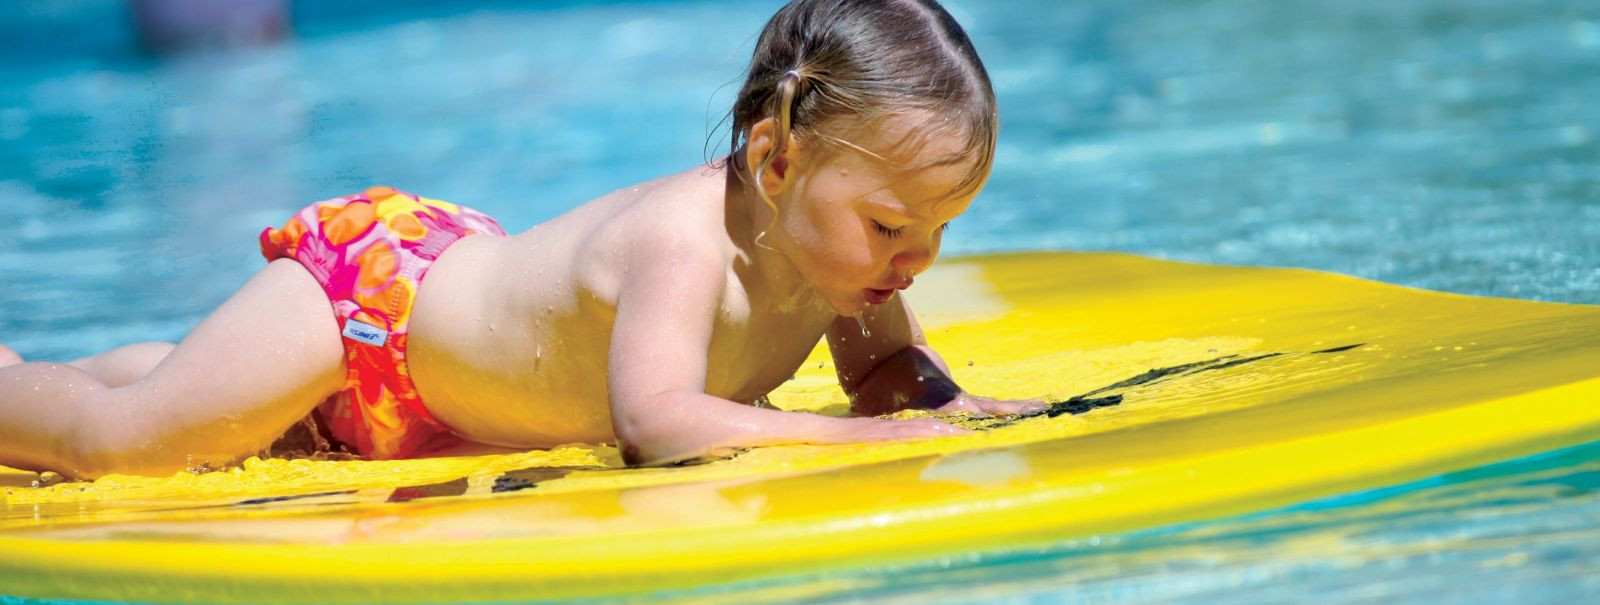 Swimming is not just a fun activity but also an essential life skill that offers numerous health benefits. Equipping your child with the right swimming gear is 